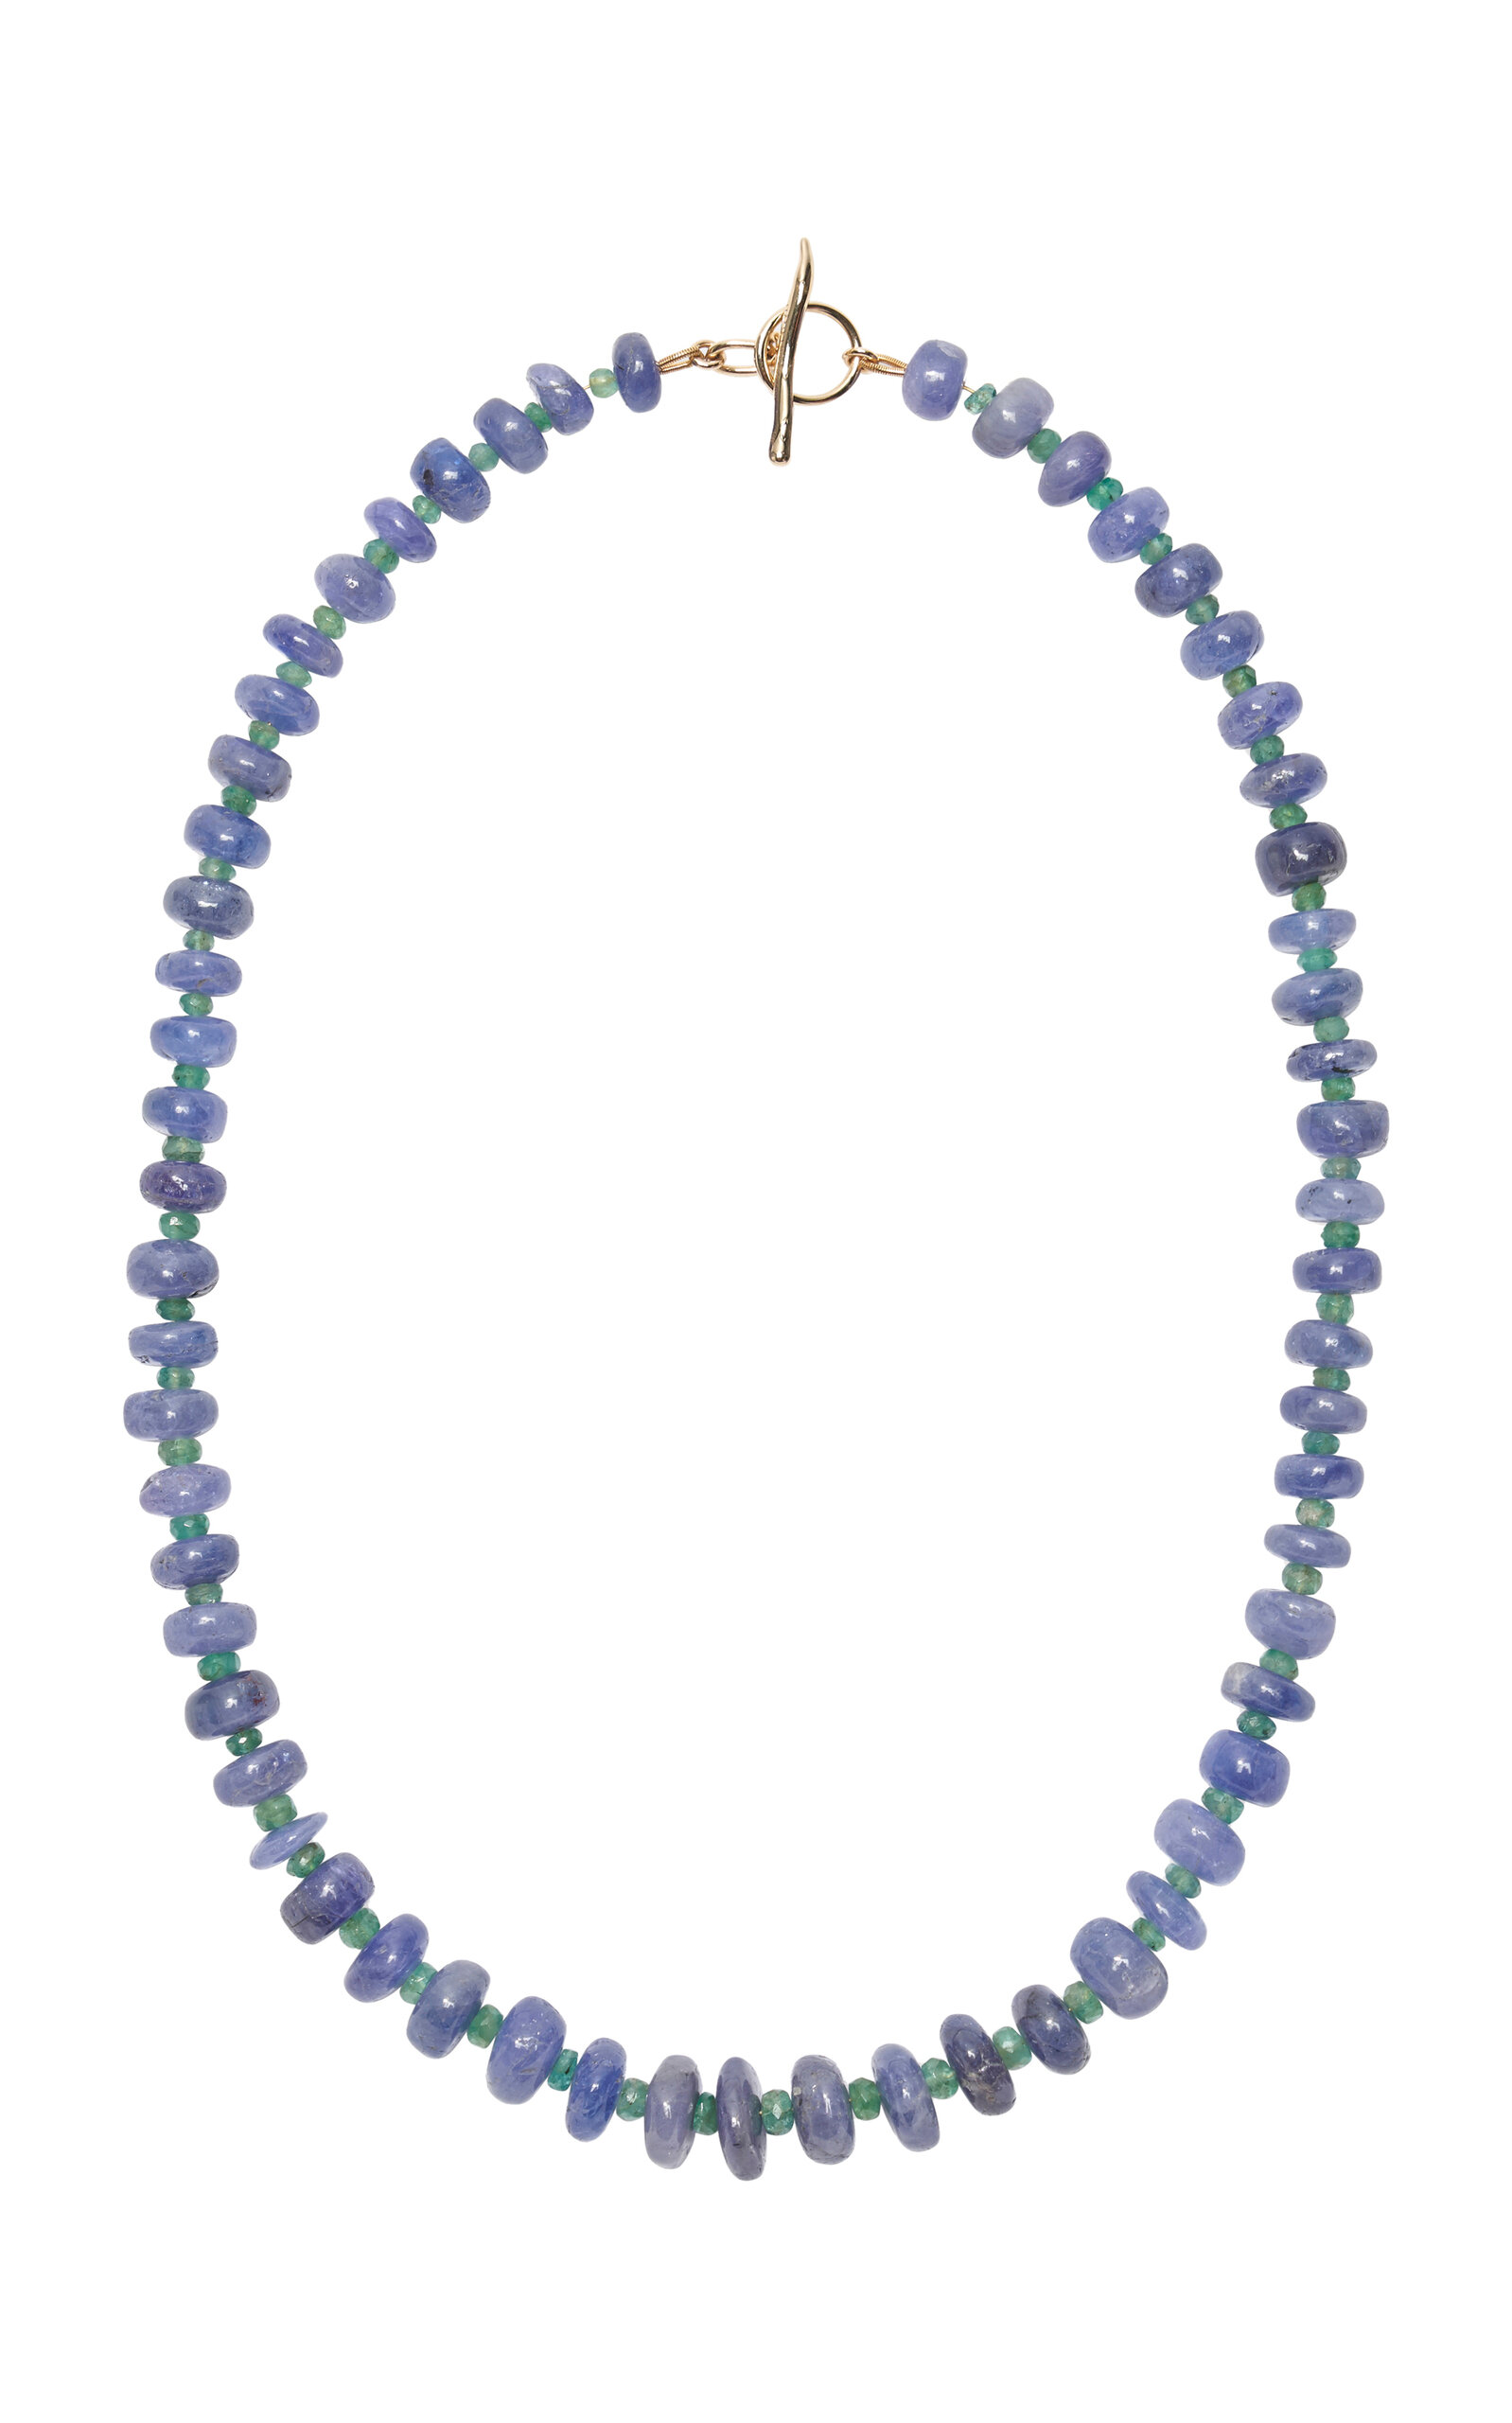 Exclusive Tanzanite and Emerald 14k Gold Necklace